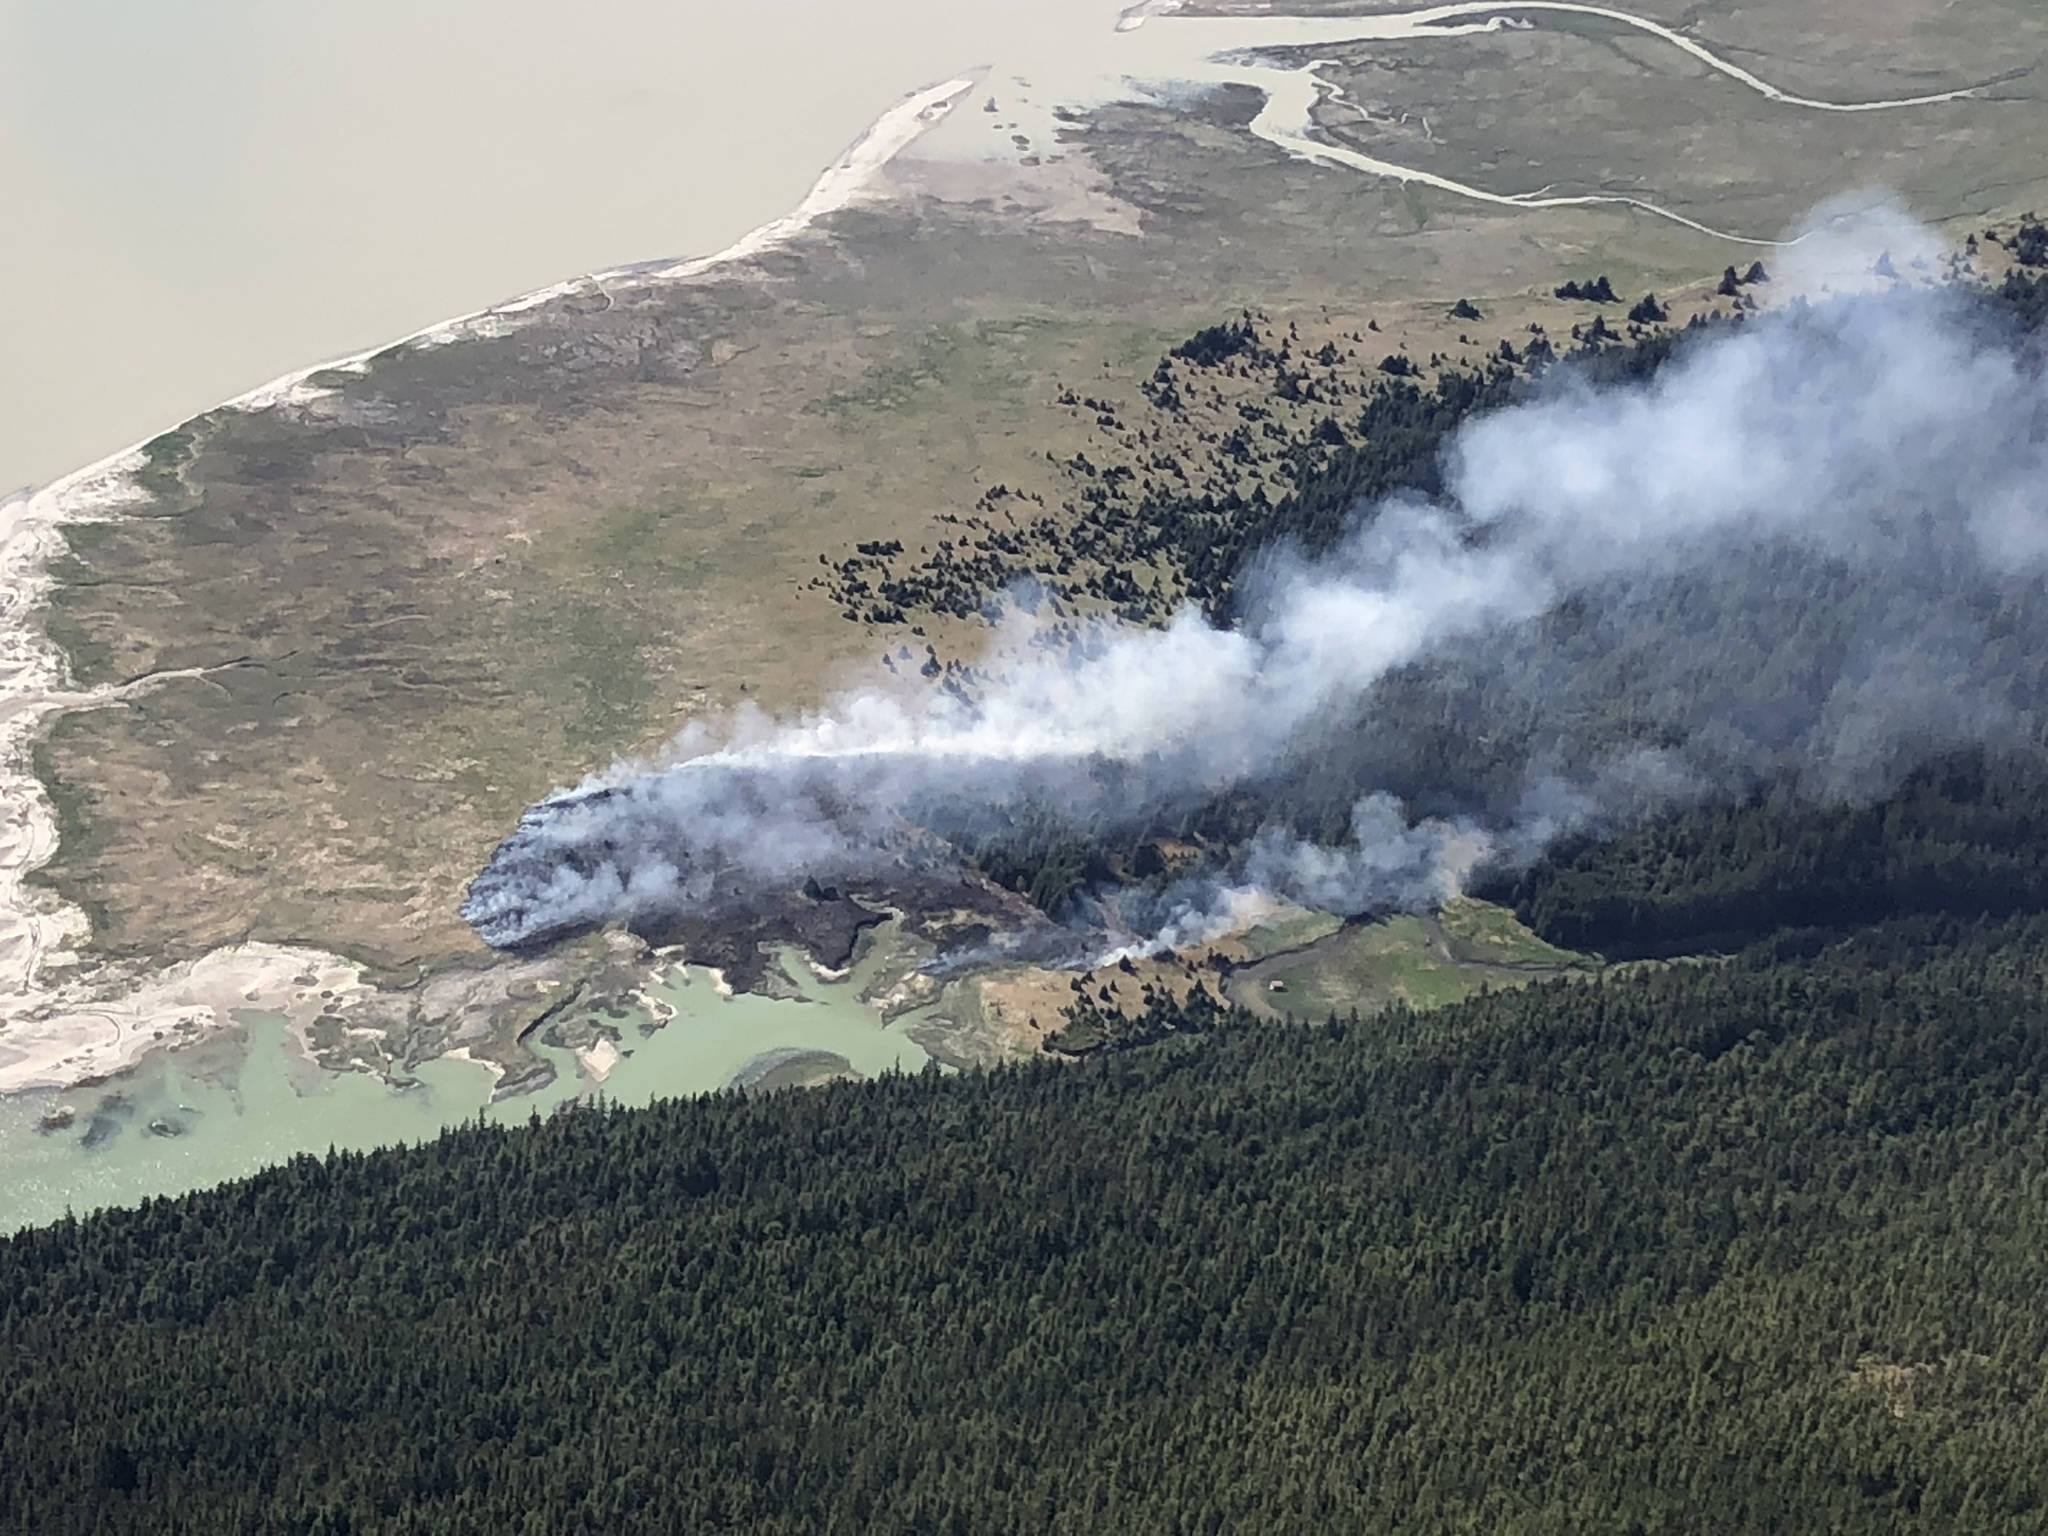 Antler Flats, in the northeast section of Berners Bay, is the site of a 56-acres fire started Thursday. (Photo courtesy Johanna Vollenweider and Jacek Maselko)